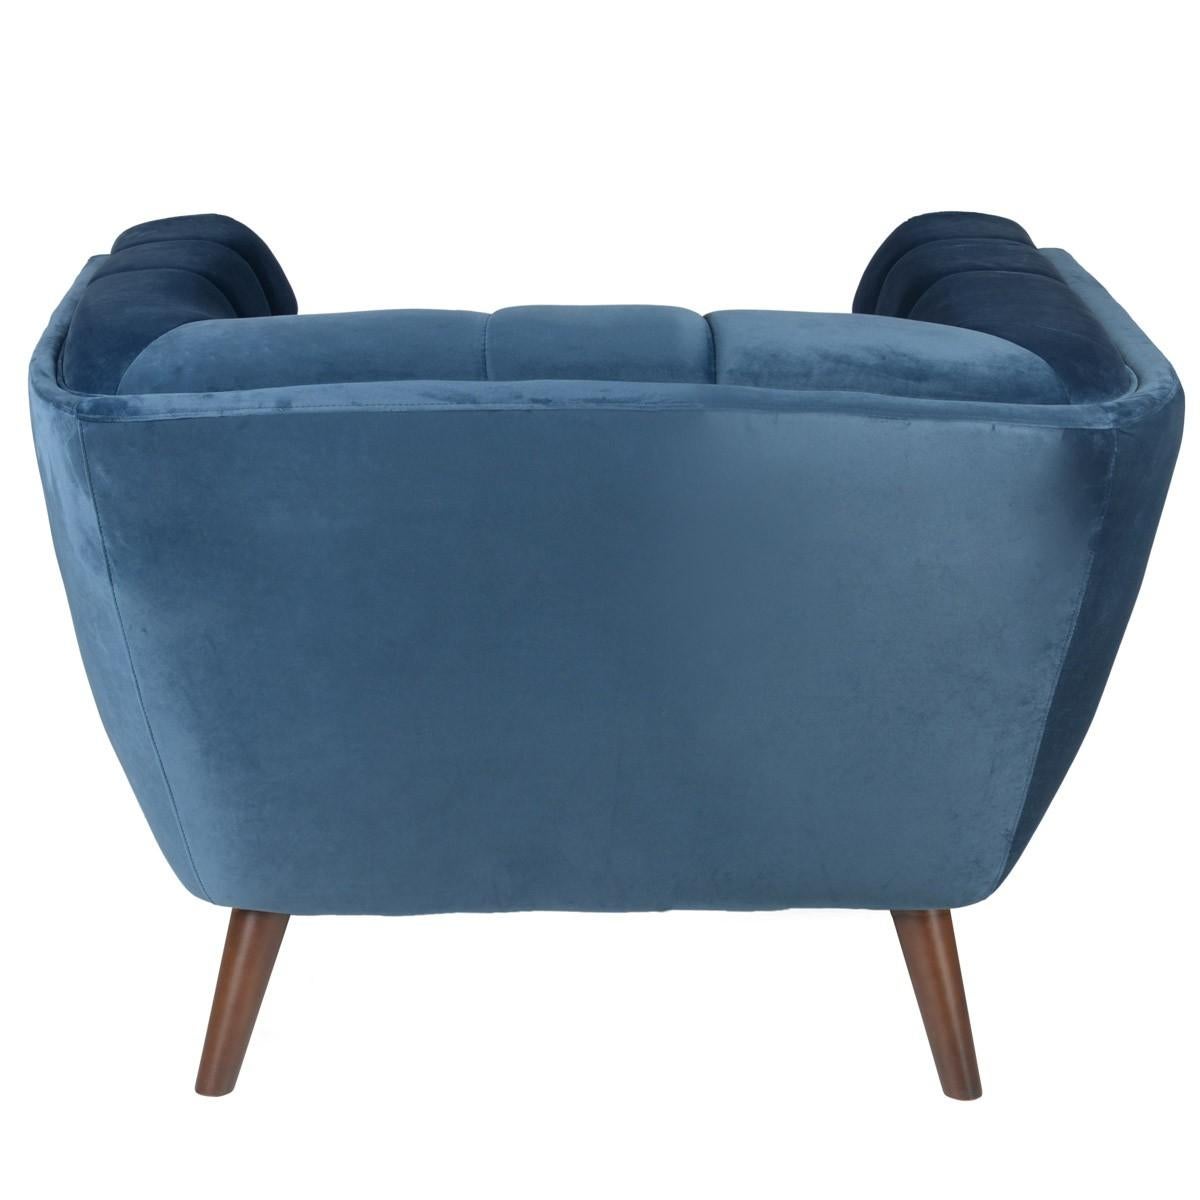 Blue Velvet And Wooden Feet Design Armchair In Excellent Condition For Sale In Tourcoing, FR